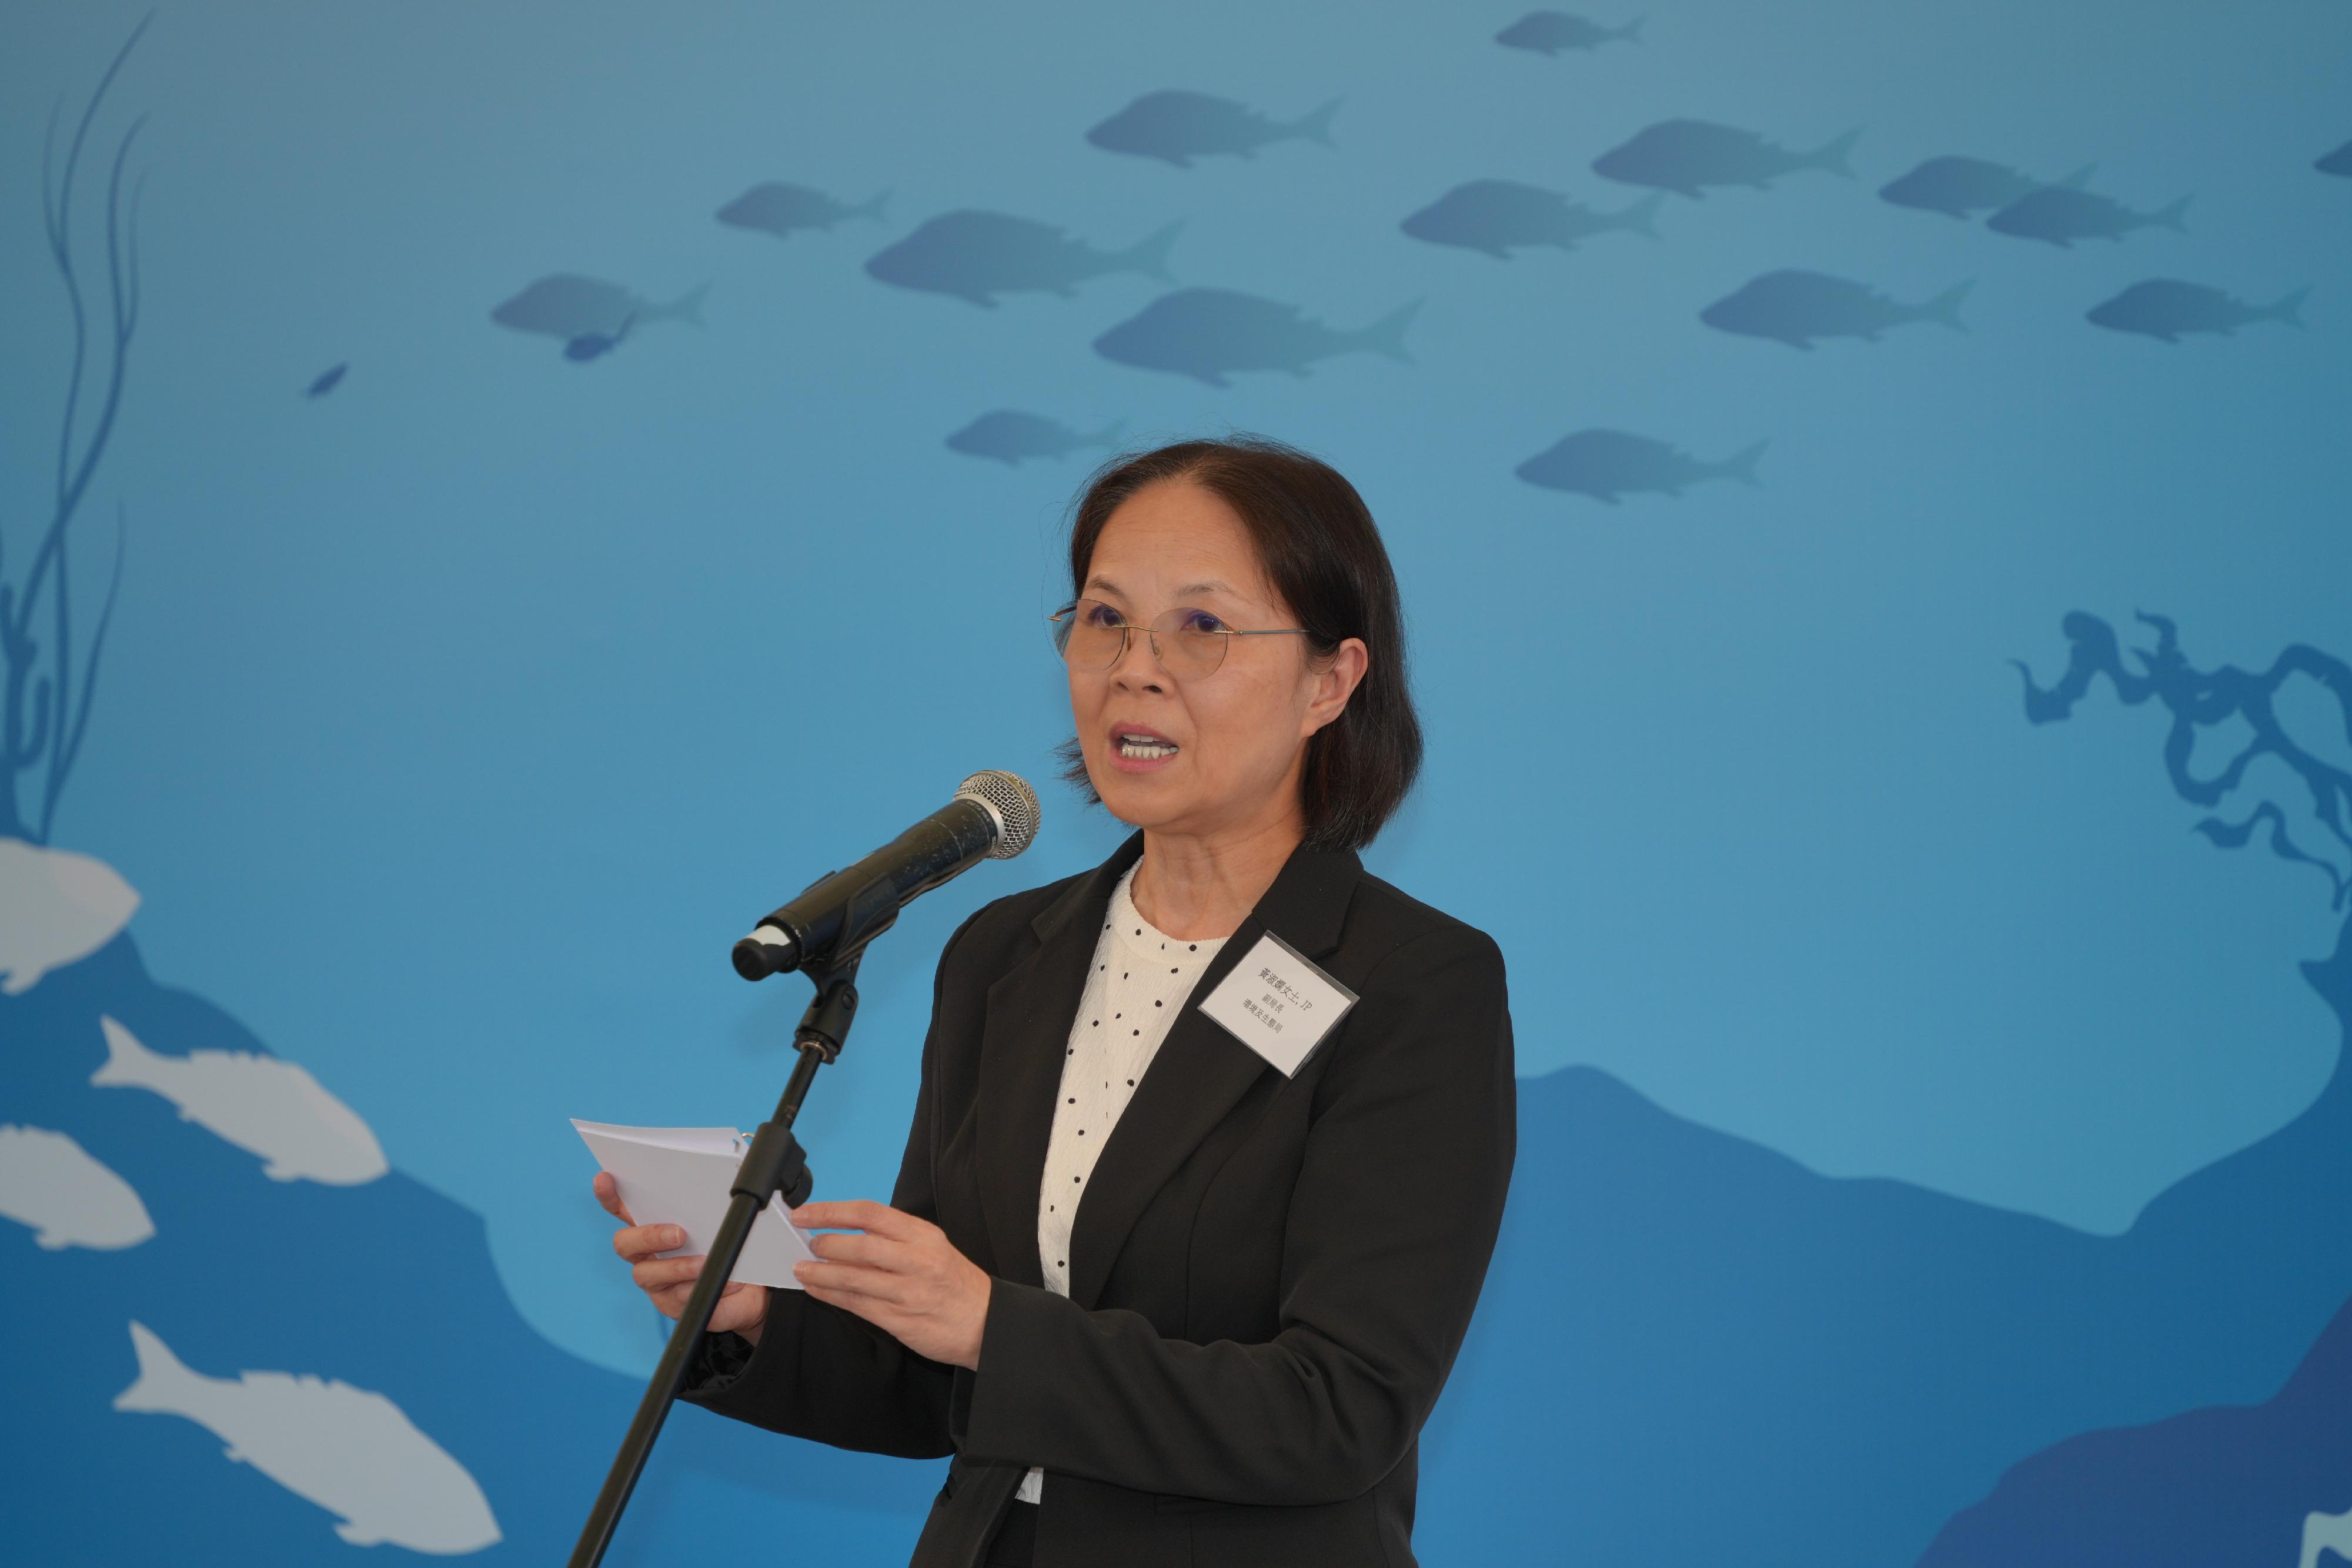 The Agriculture, Fisheries and Conservation Department launched a fish-restocking exercise today (June 6), the designated National Fish Releasing Day. Photo shows the Under Secretary for Environment and Ecology, Miss Diane Wong, speaking at the launching ceremony.